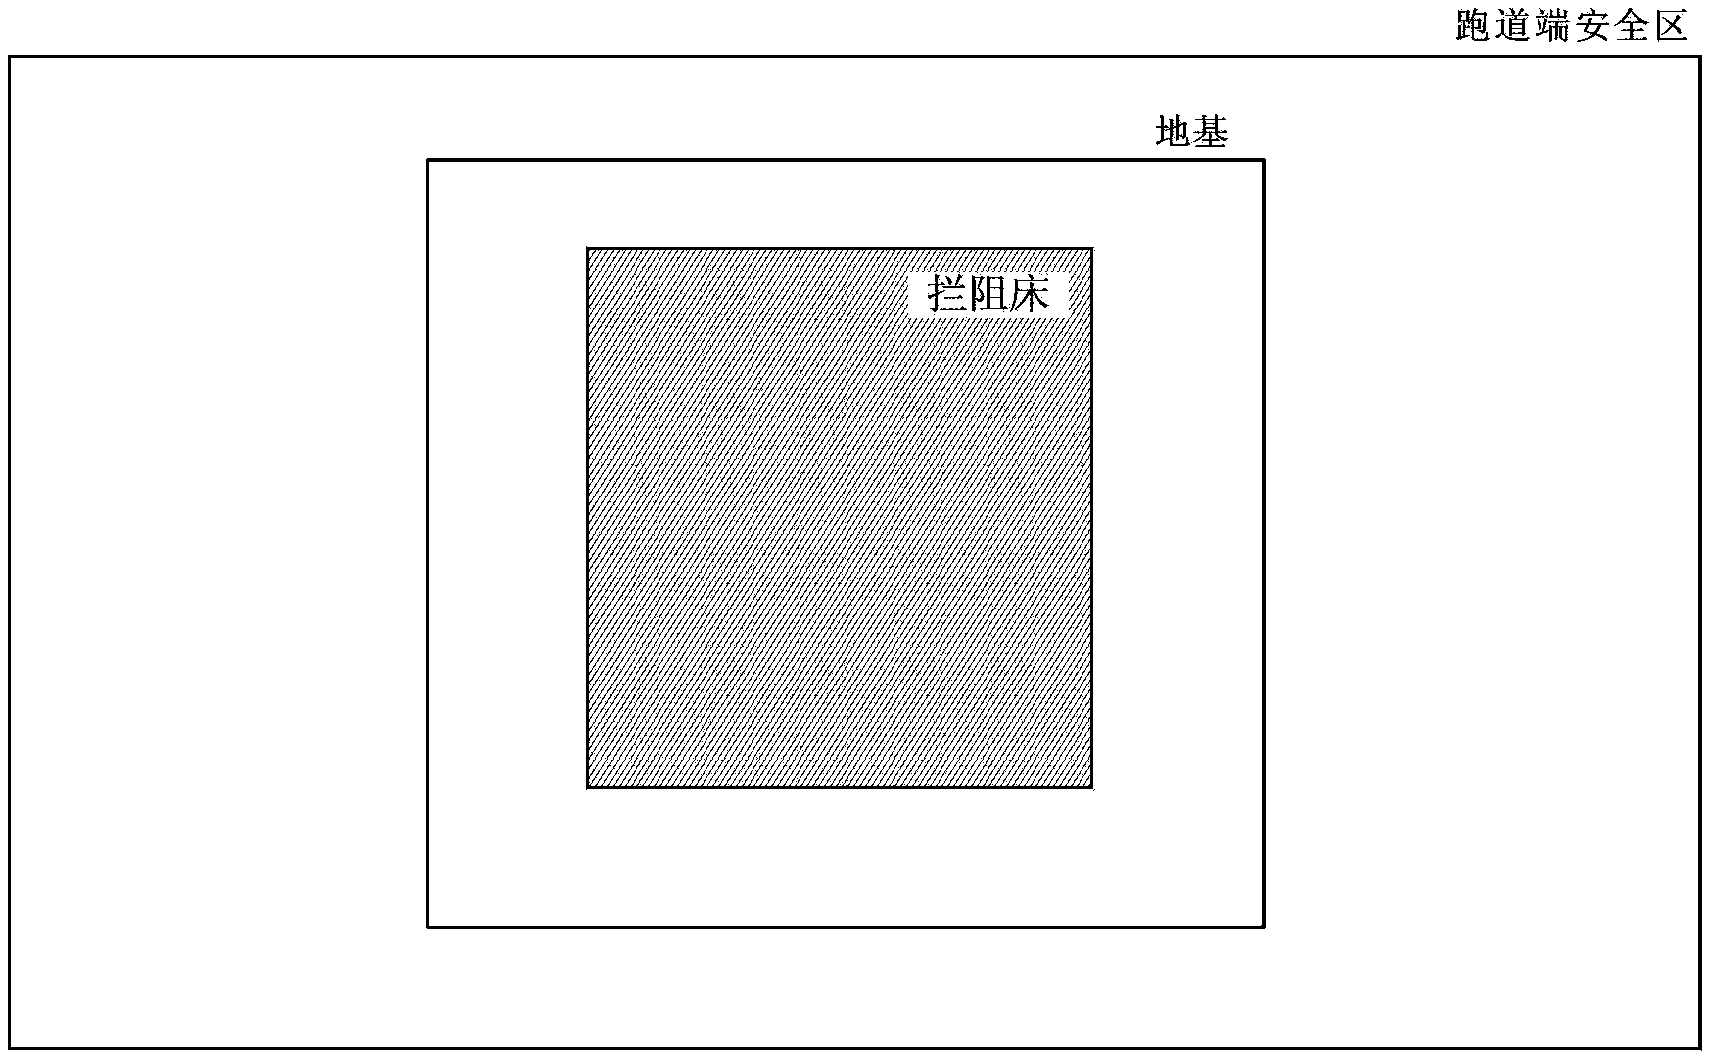 Method for laying airfield runway end arresting system